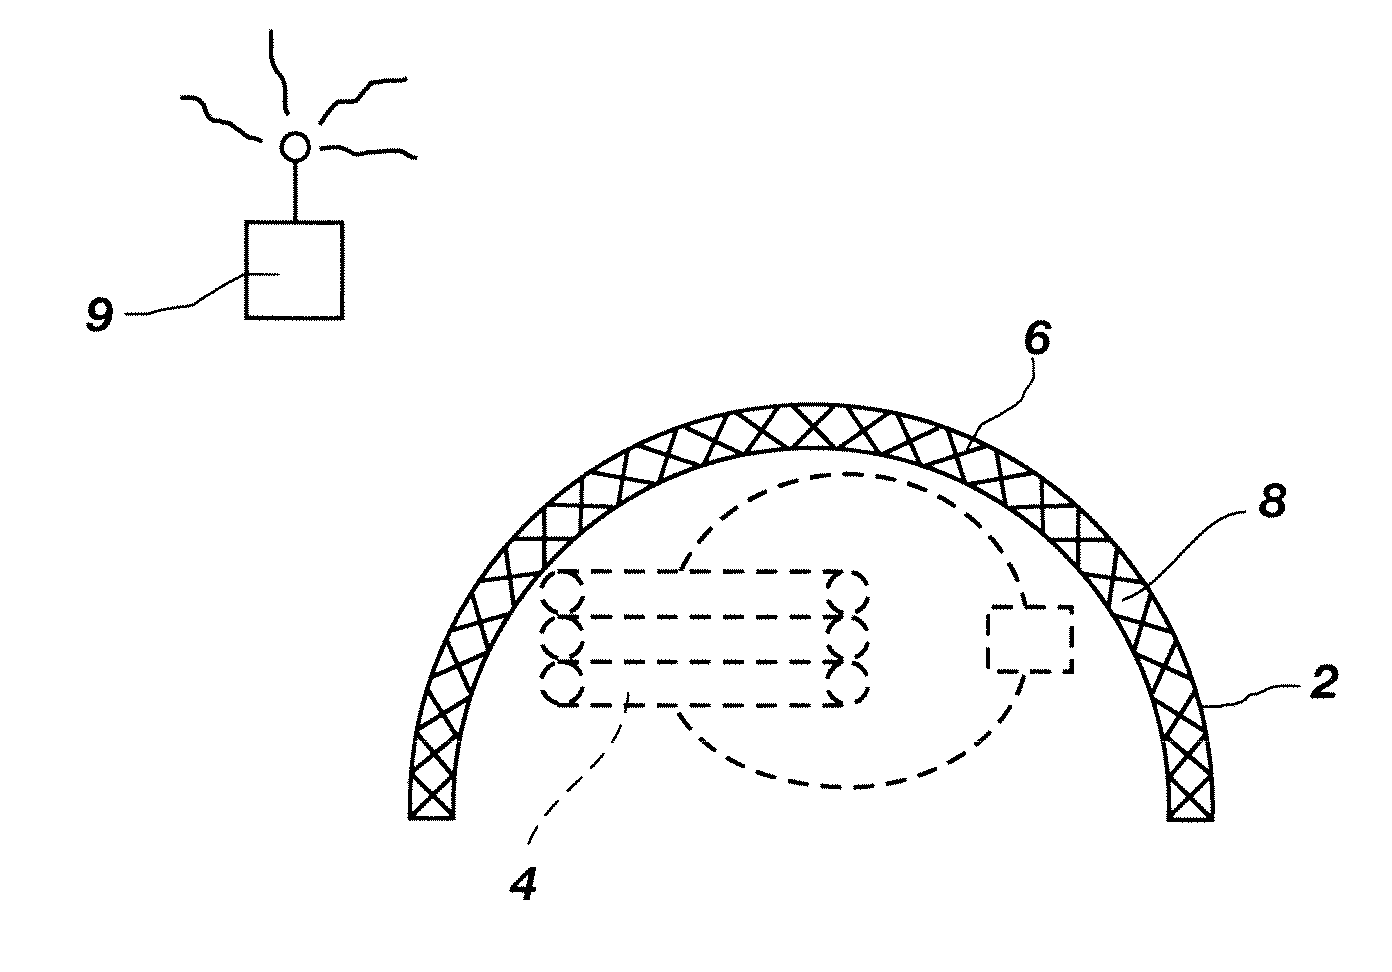 Methods of preventing initiation of explosive devices